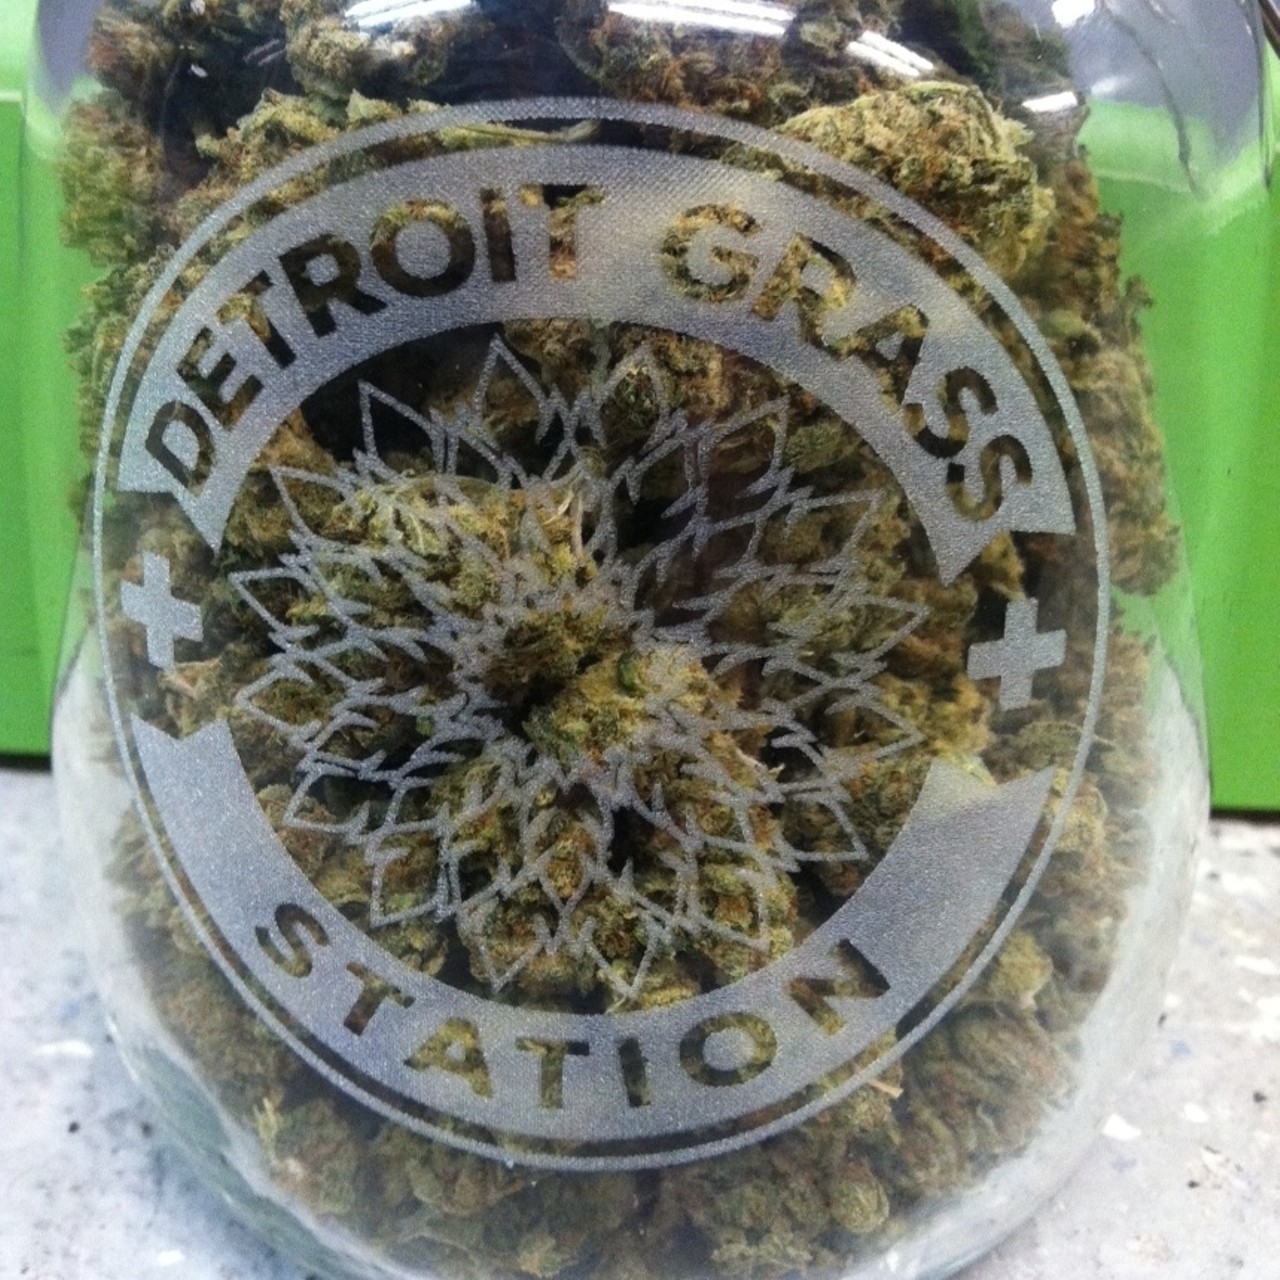 Detroit Grass Station
Refill your bowls at the Detroit Grass Station. Located in the north end of Detroit in repurposed gas station just a short drive from Downtown Detroit, Midtown and the 3 big casinos. Open every day the DGS offers flowers, topicals, extract, edibles and preroll.
2930 E Grand Blvd, Detroit, MI 48202
(313) 312-0877